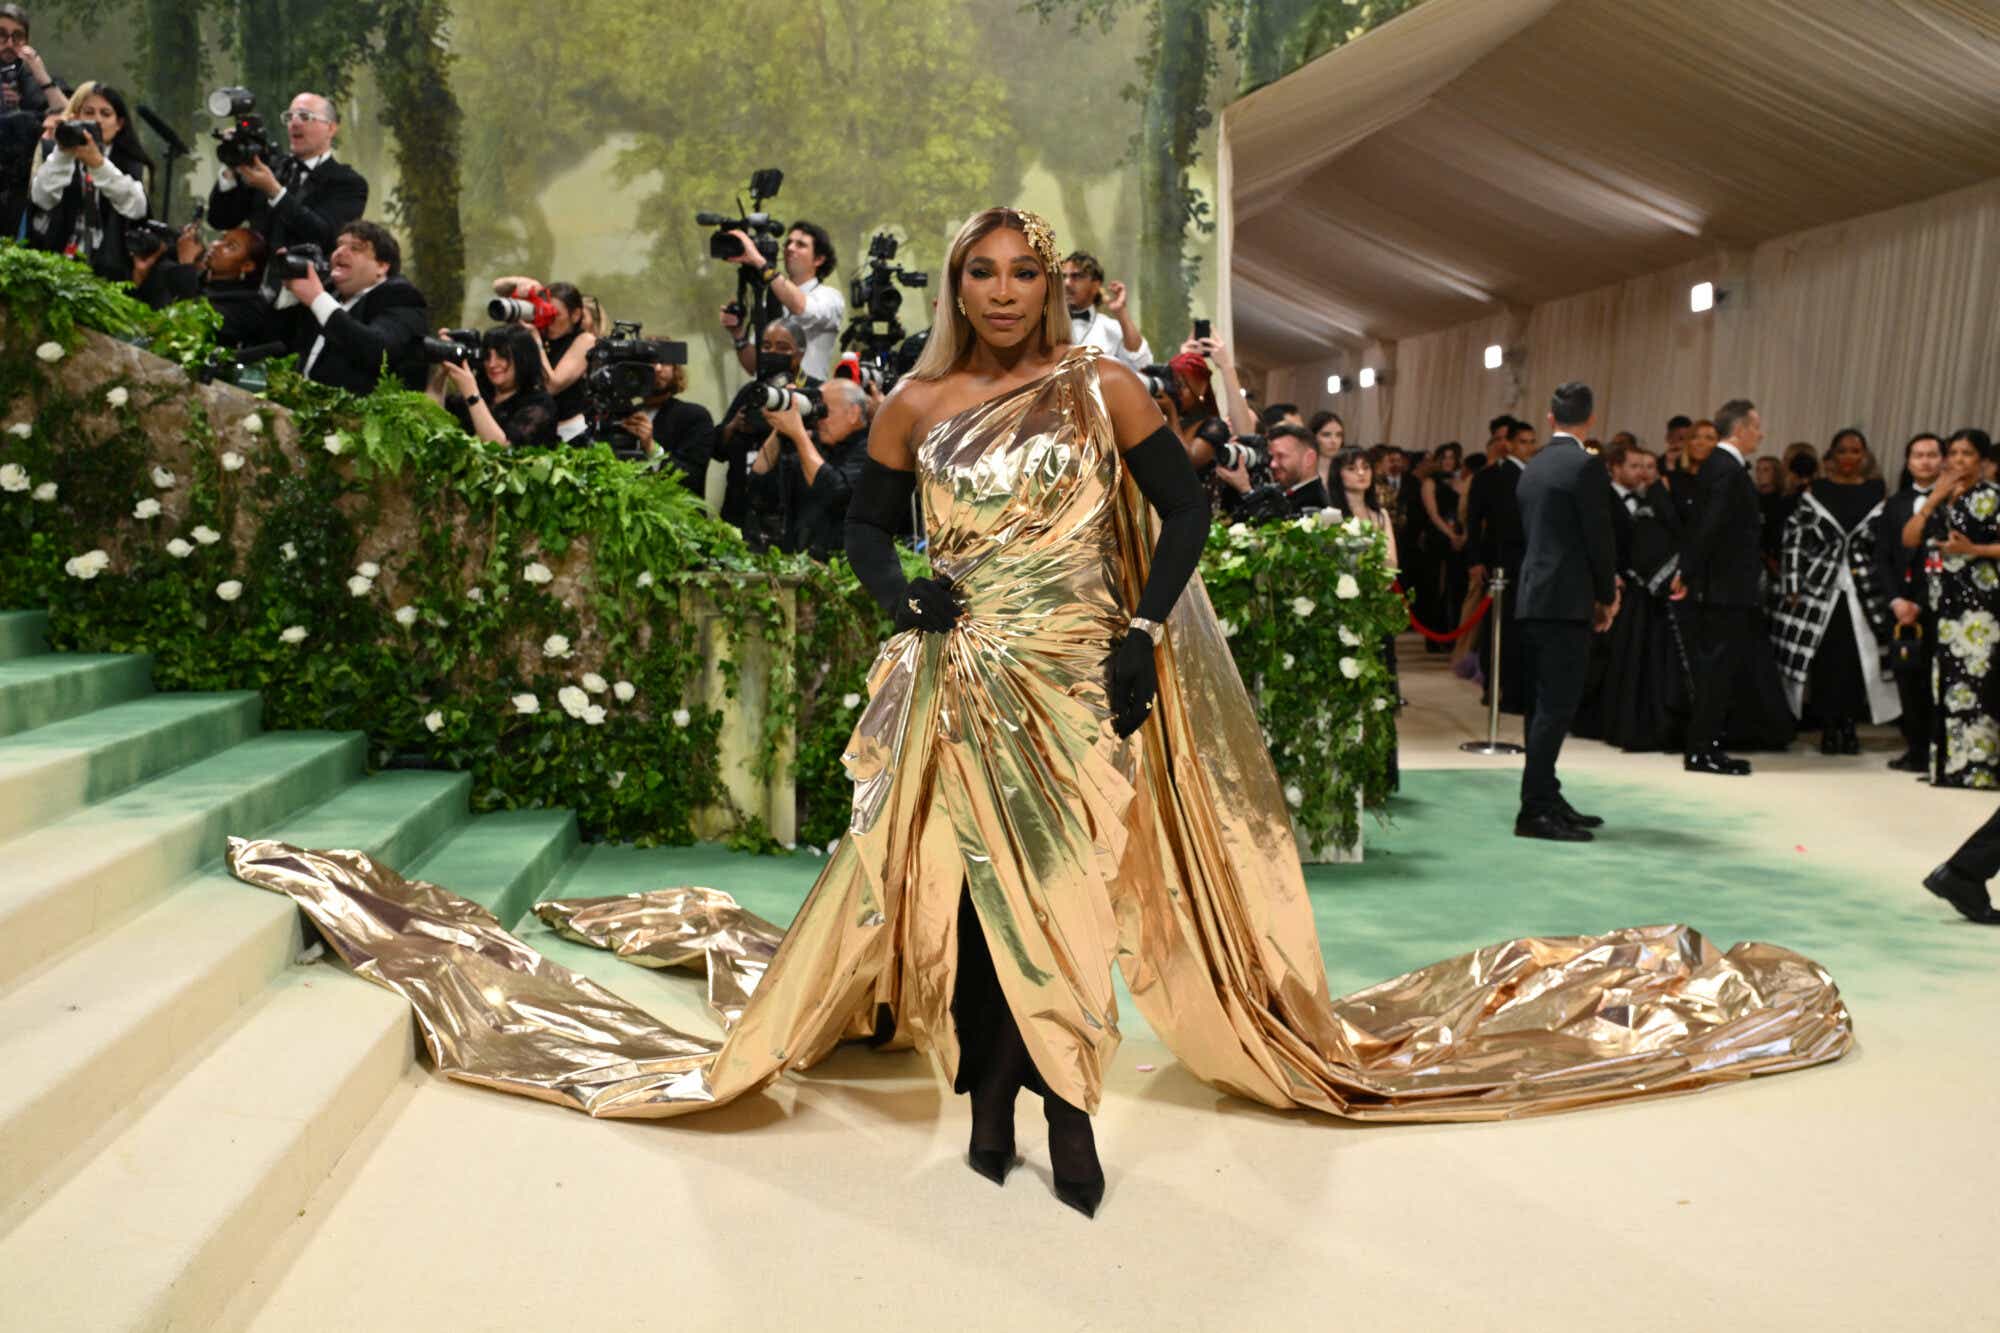 Serena Williams stuns in a shiny gold one-shoulder Grecian inspired gown with a cape and long train.